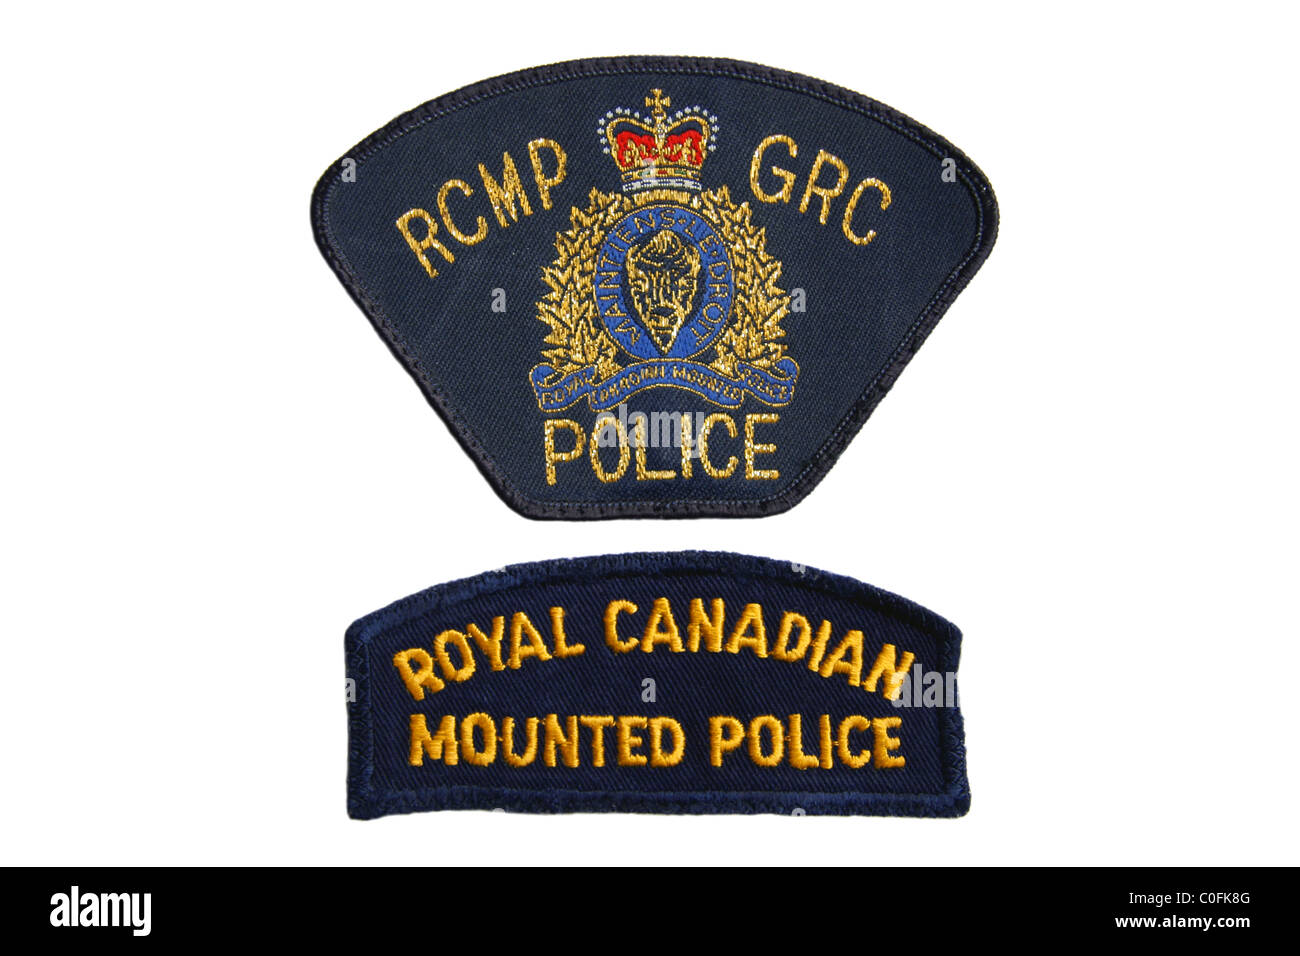 Royal Canadian Mounted Police patch RCMP Stock Photo